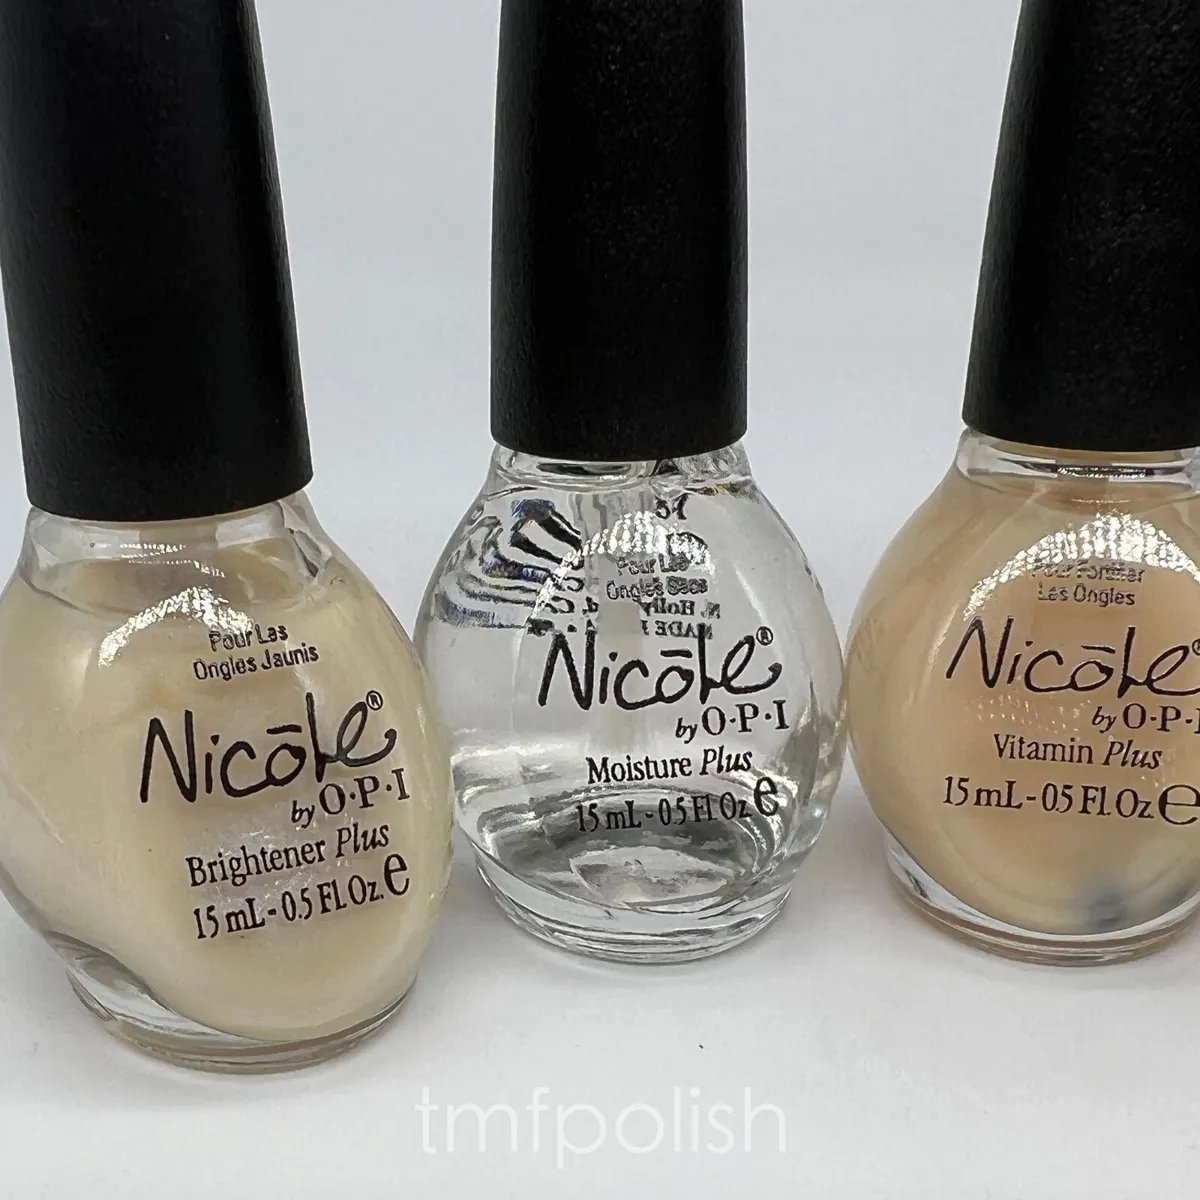 Forsendelse implicitte marmor Lot of 4 Brand New Nicole by OPI Treatment Nail Polish Bundle | eBay